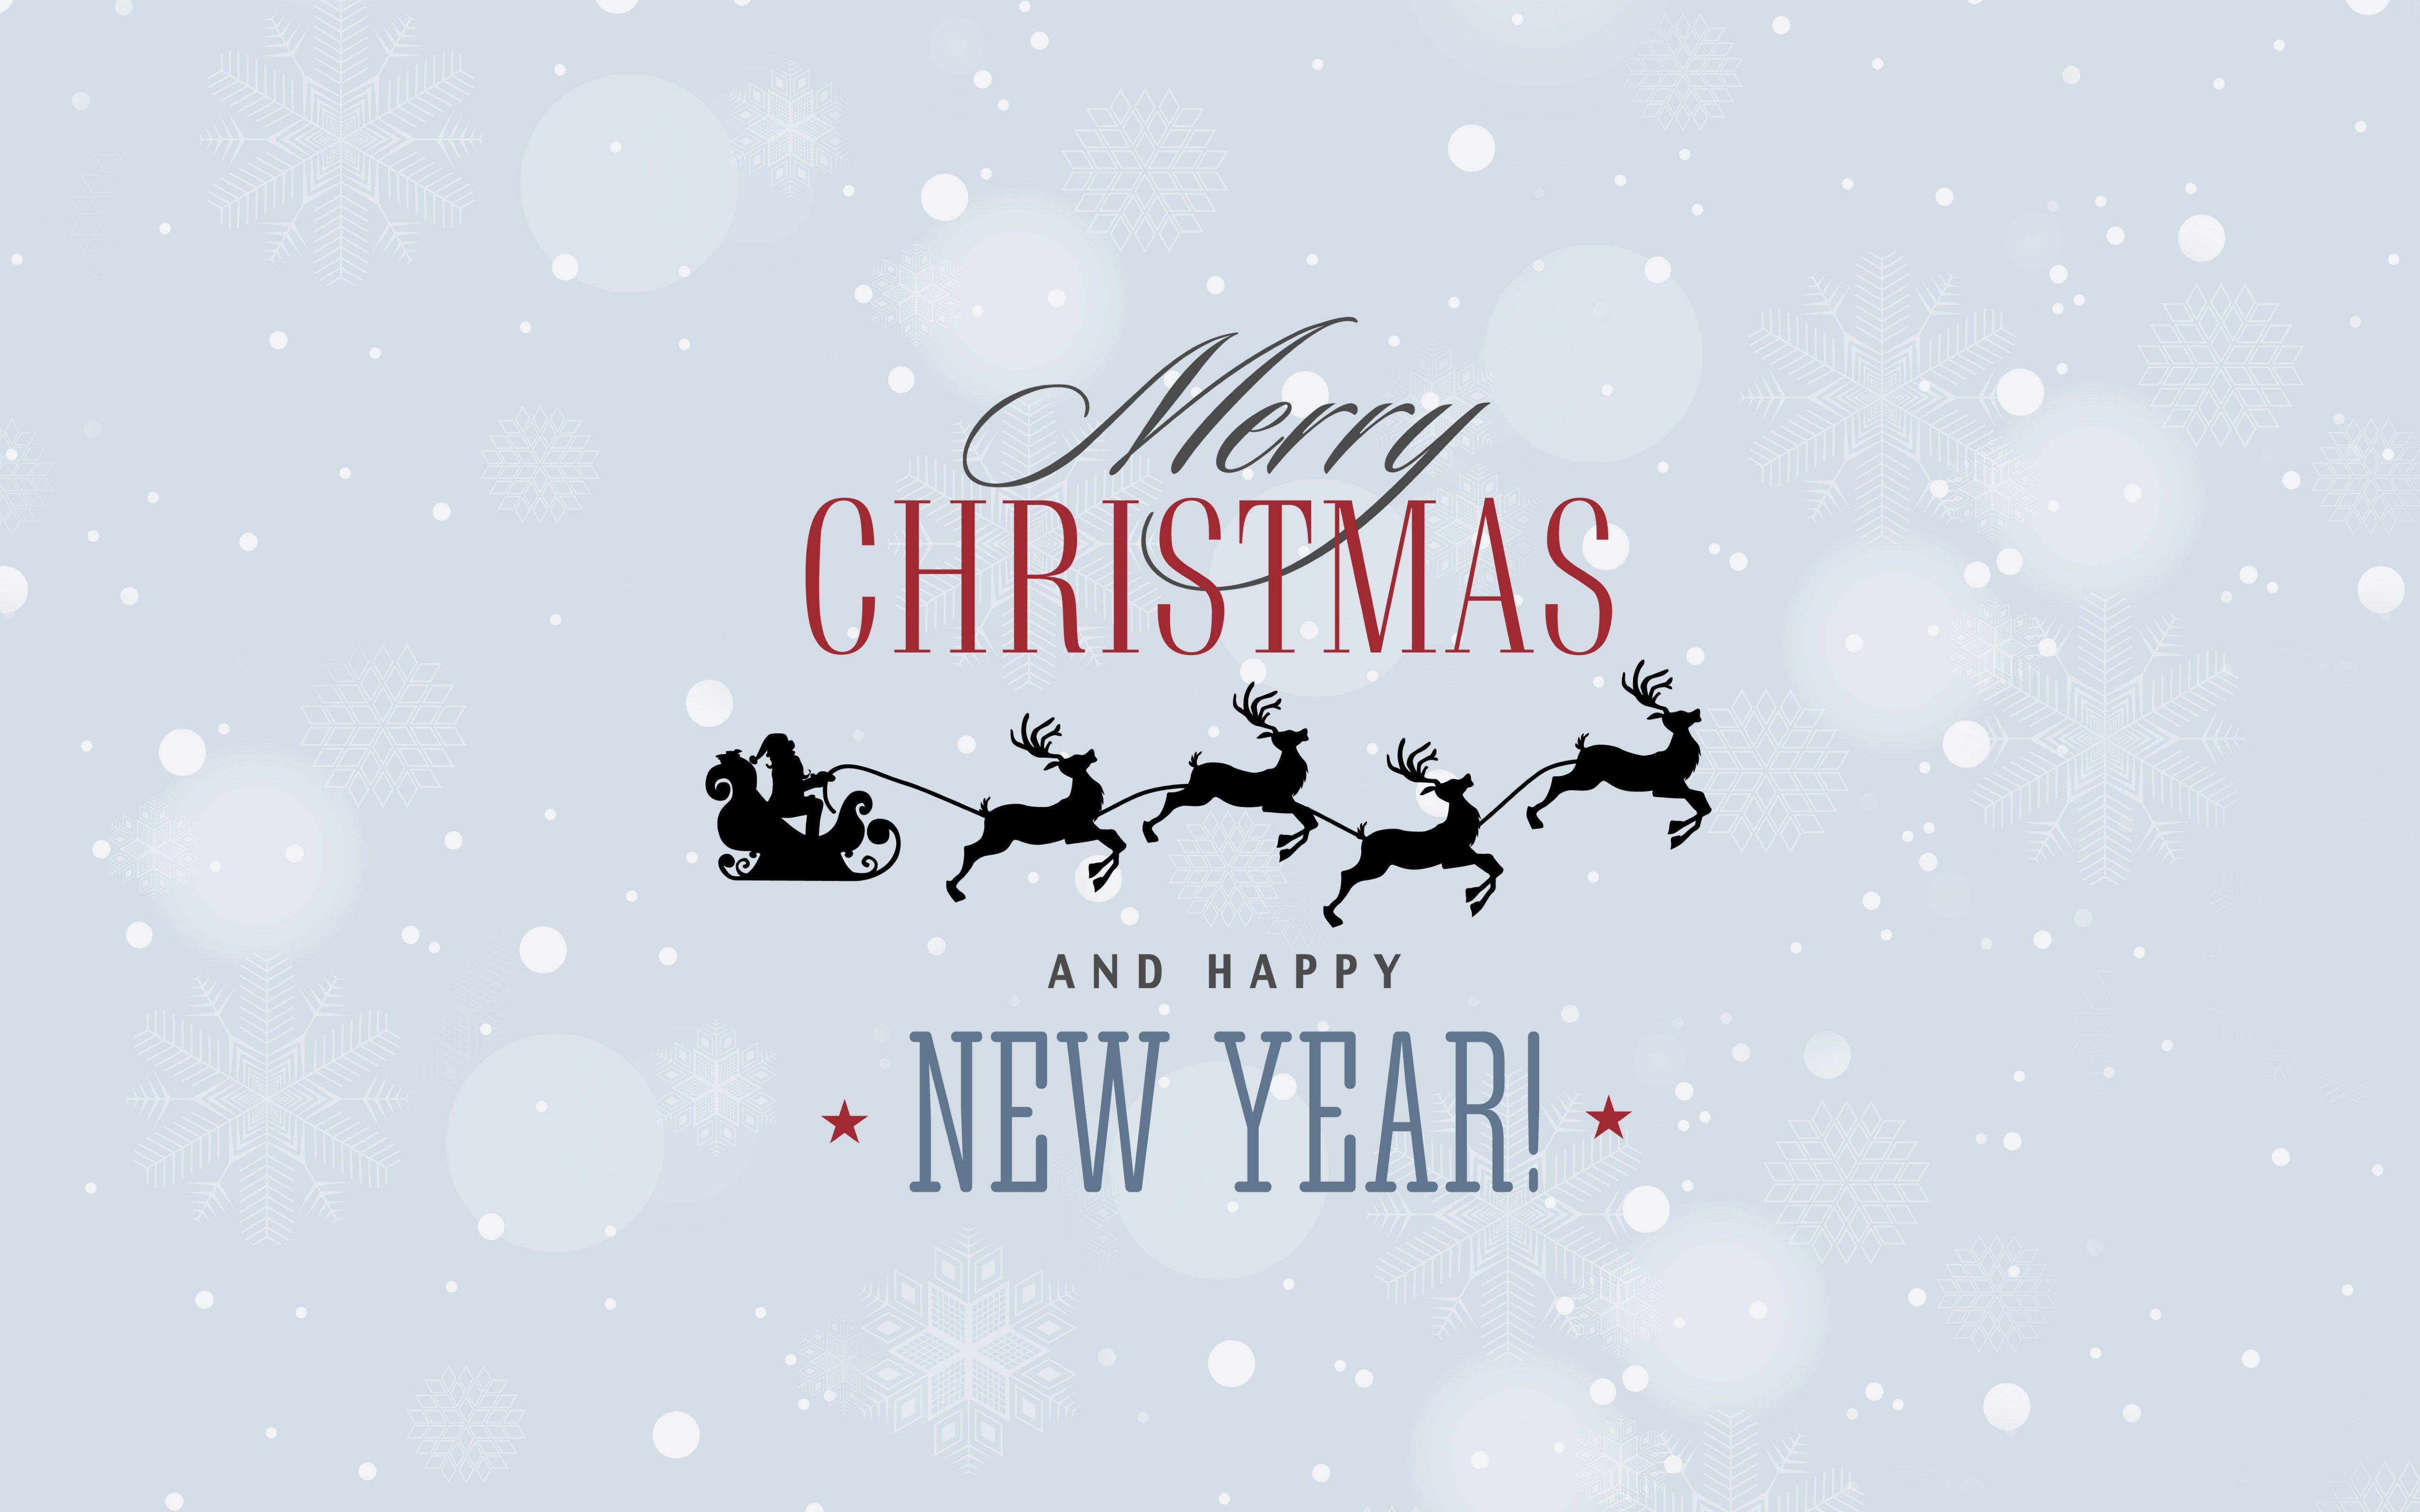 Merry Christmas and a Happy New Year wallpaper 5120x3200